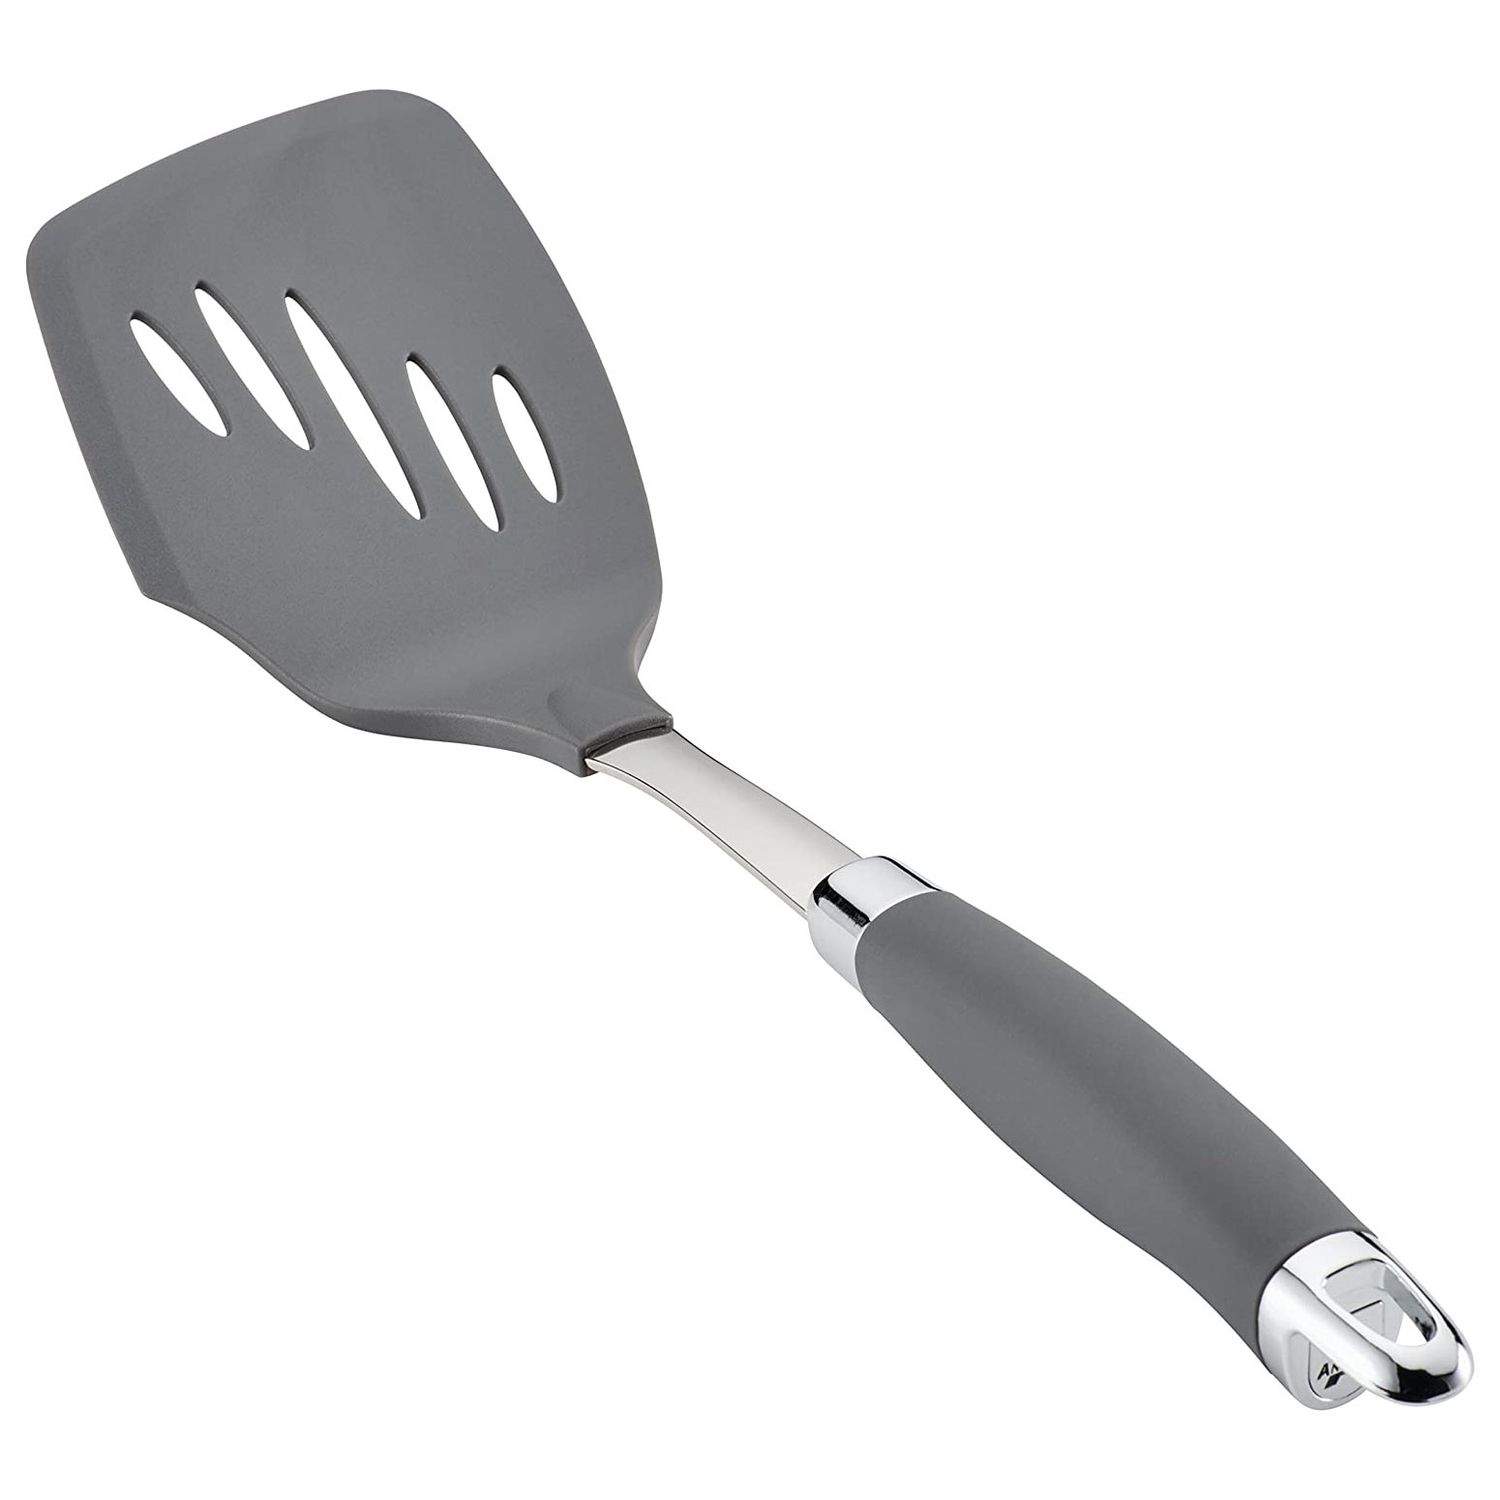 Pampered Chef STAINLESS STEEL FISH SPATULA perfect for delicate foods crab cakes 